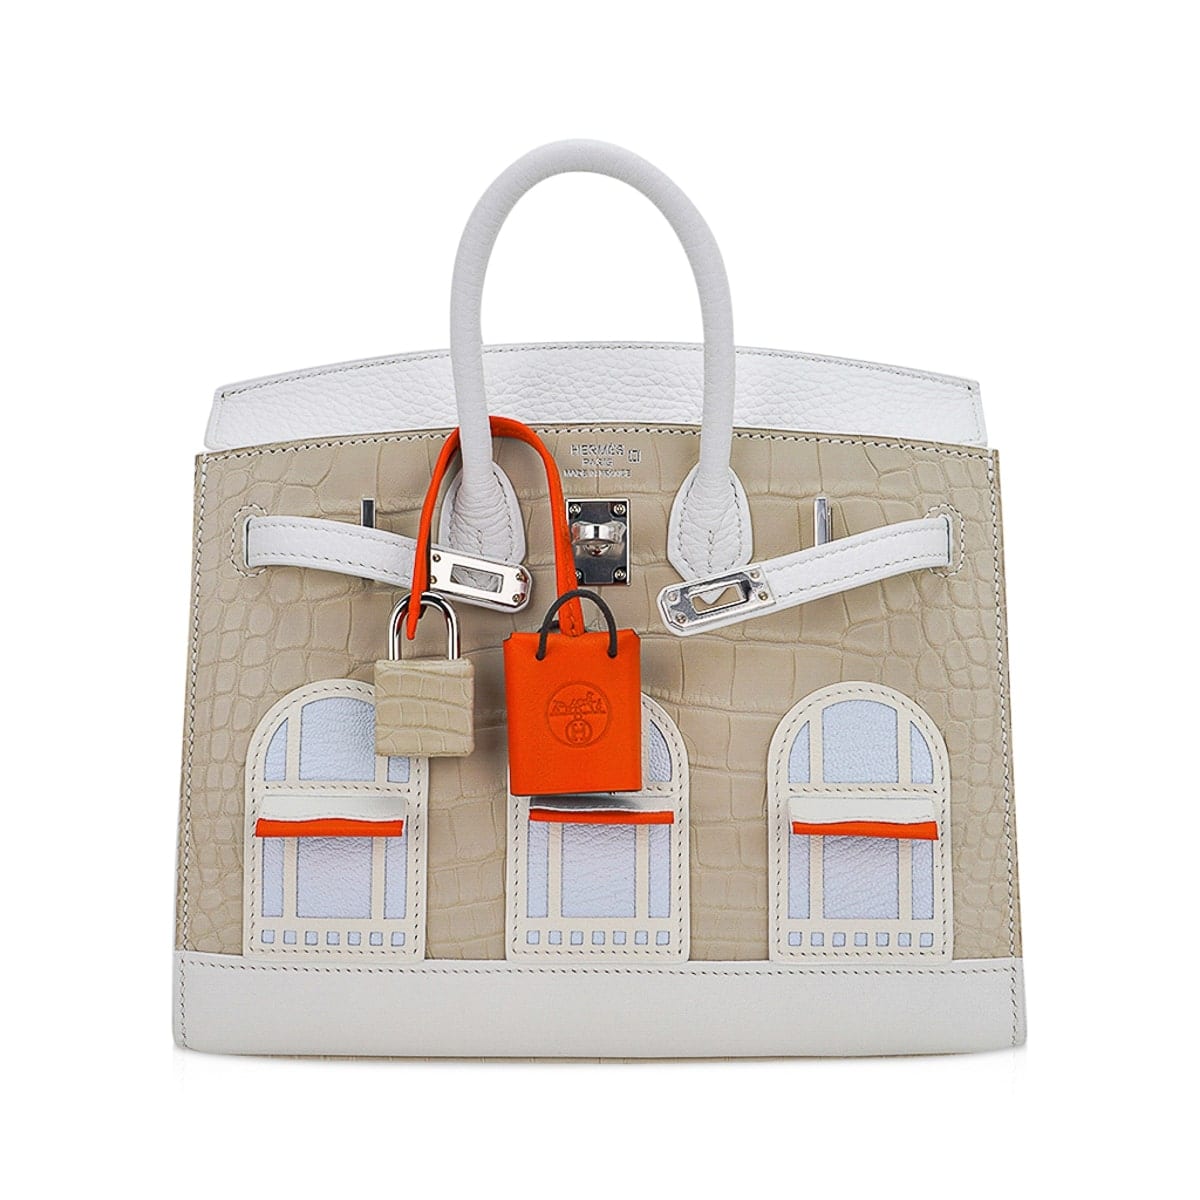 KNOW THIS Before Buying the HERMES BIRKIN FAUBOURG.. 